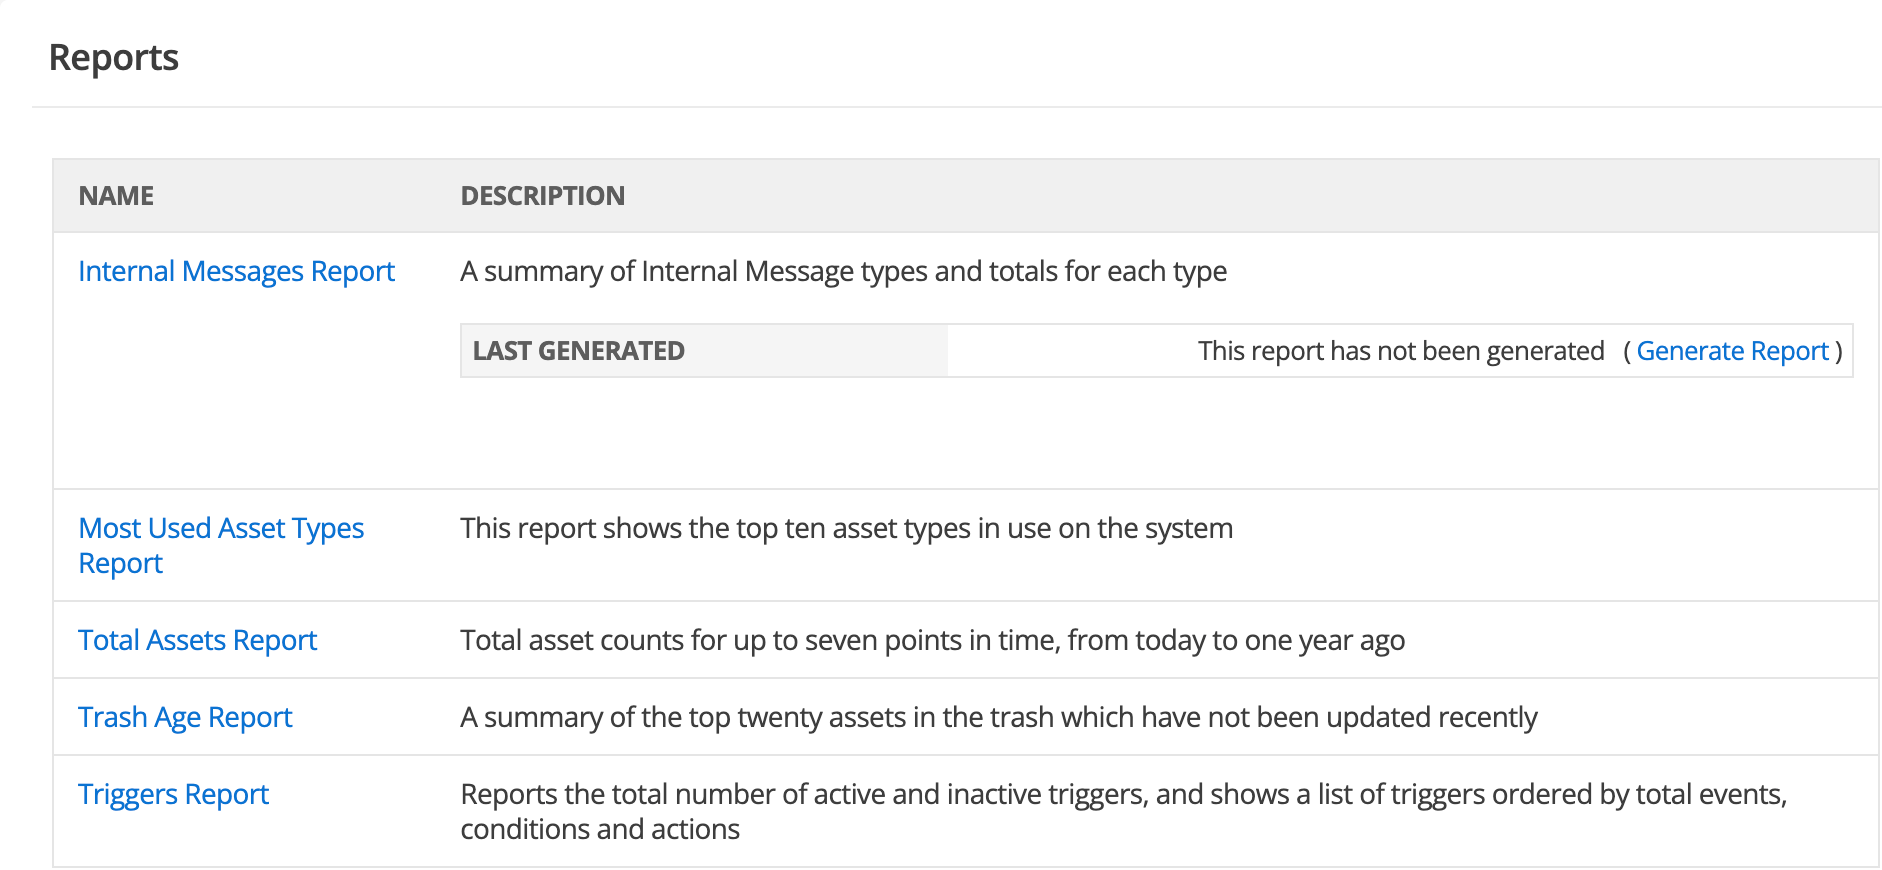 The generate report button on an empty report